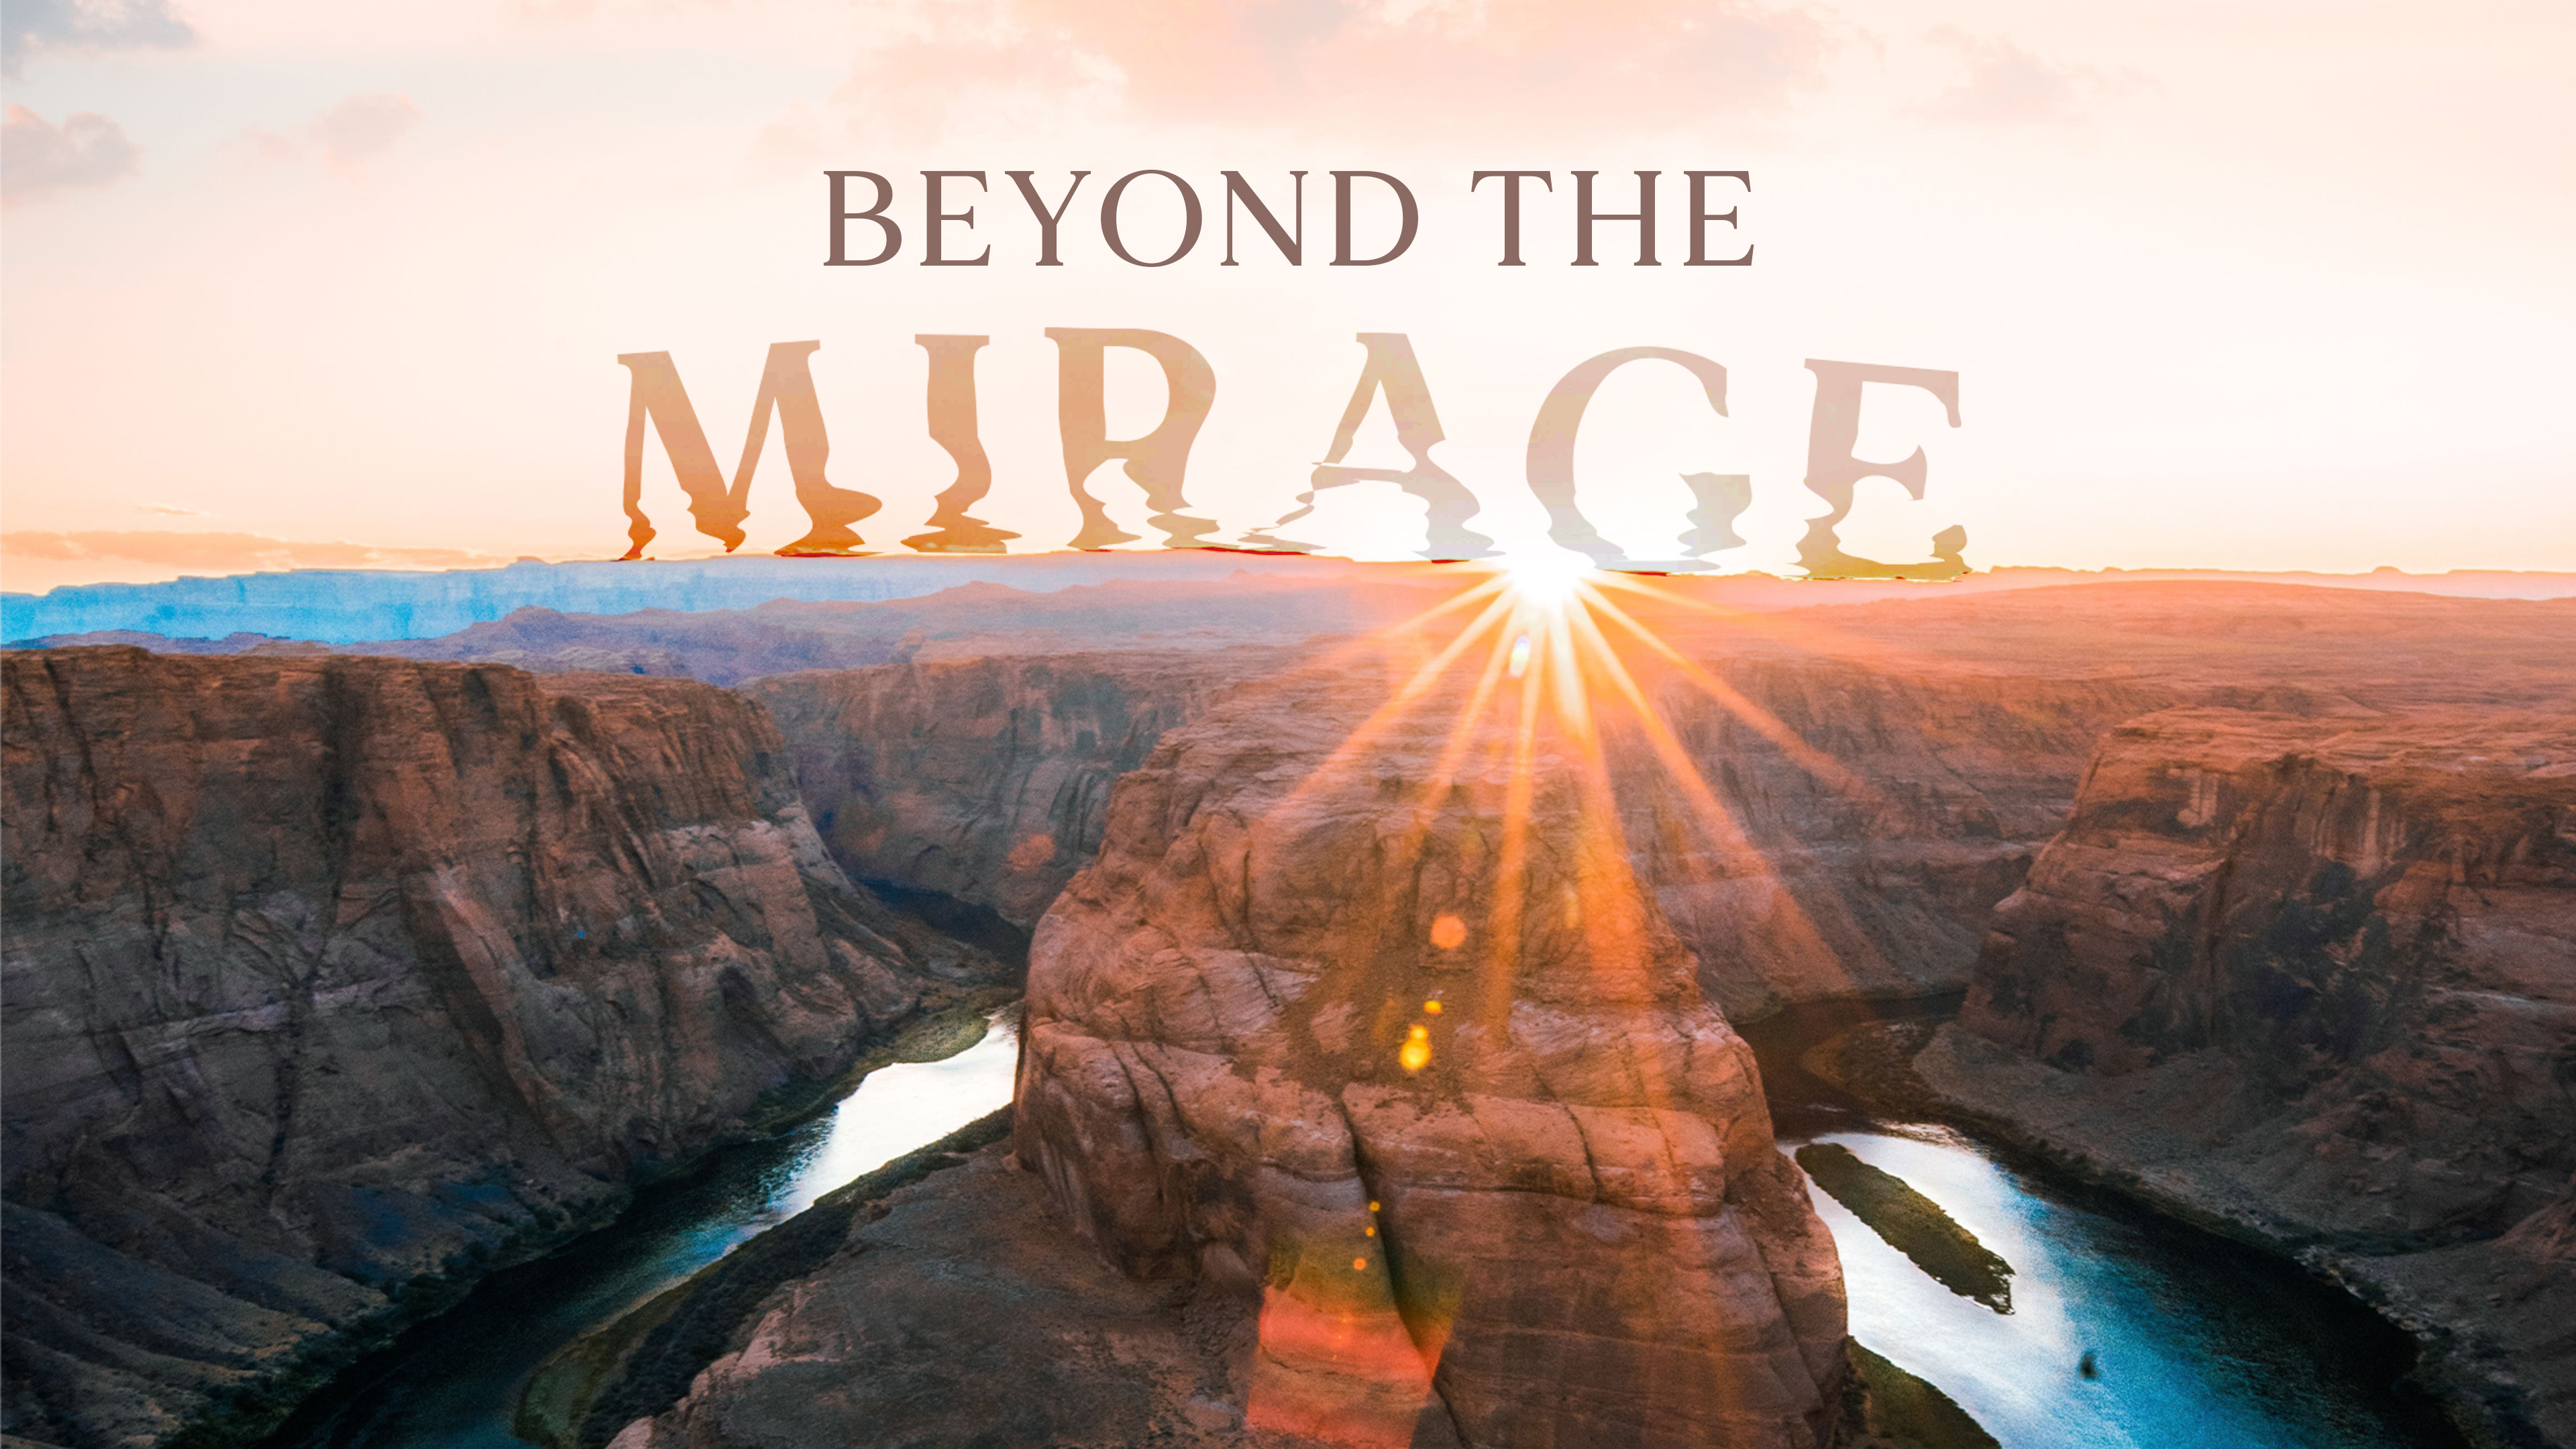 Image of the Colorado River Basin at dawn, Text: Beyond the Mirage